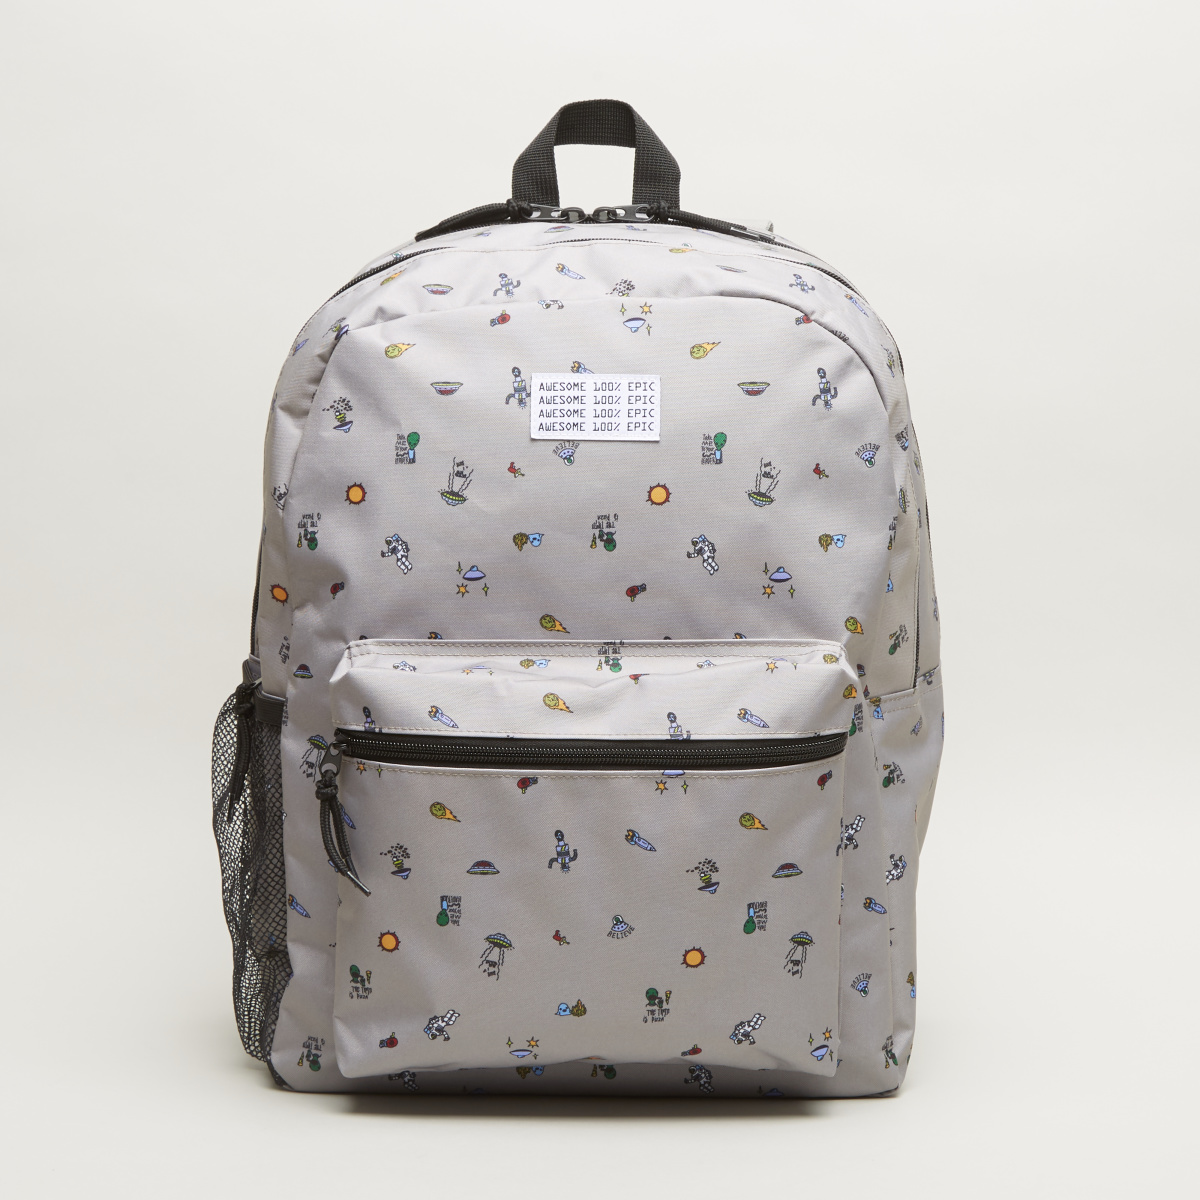 Awesome Individual Printed Laptop Backpack - 45x33x18 cms